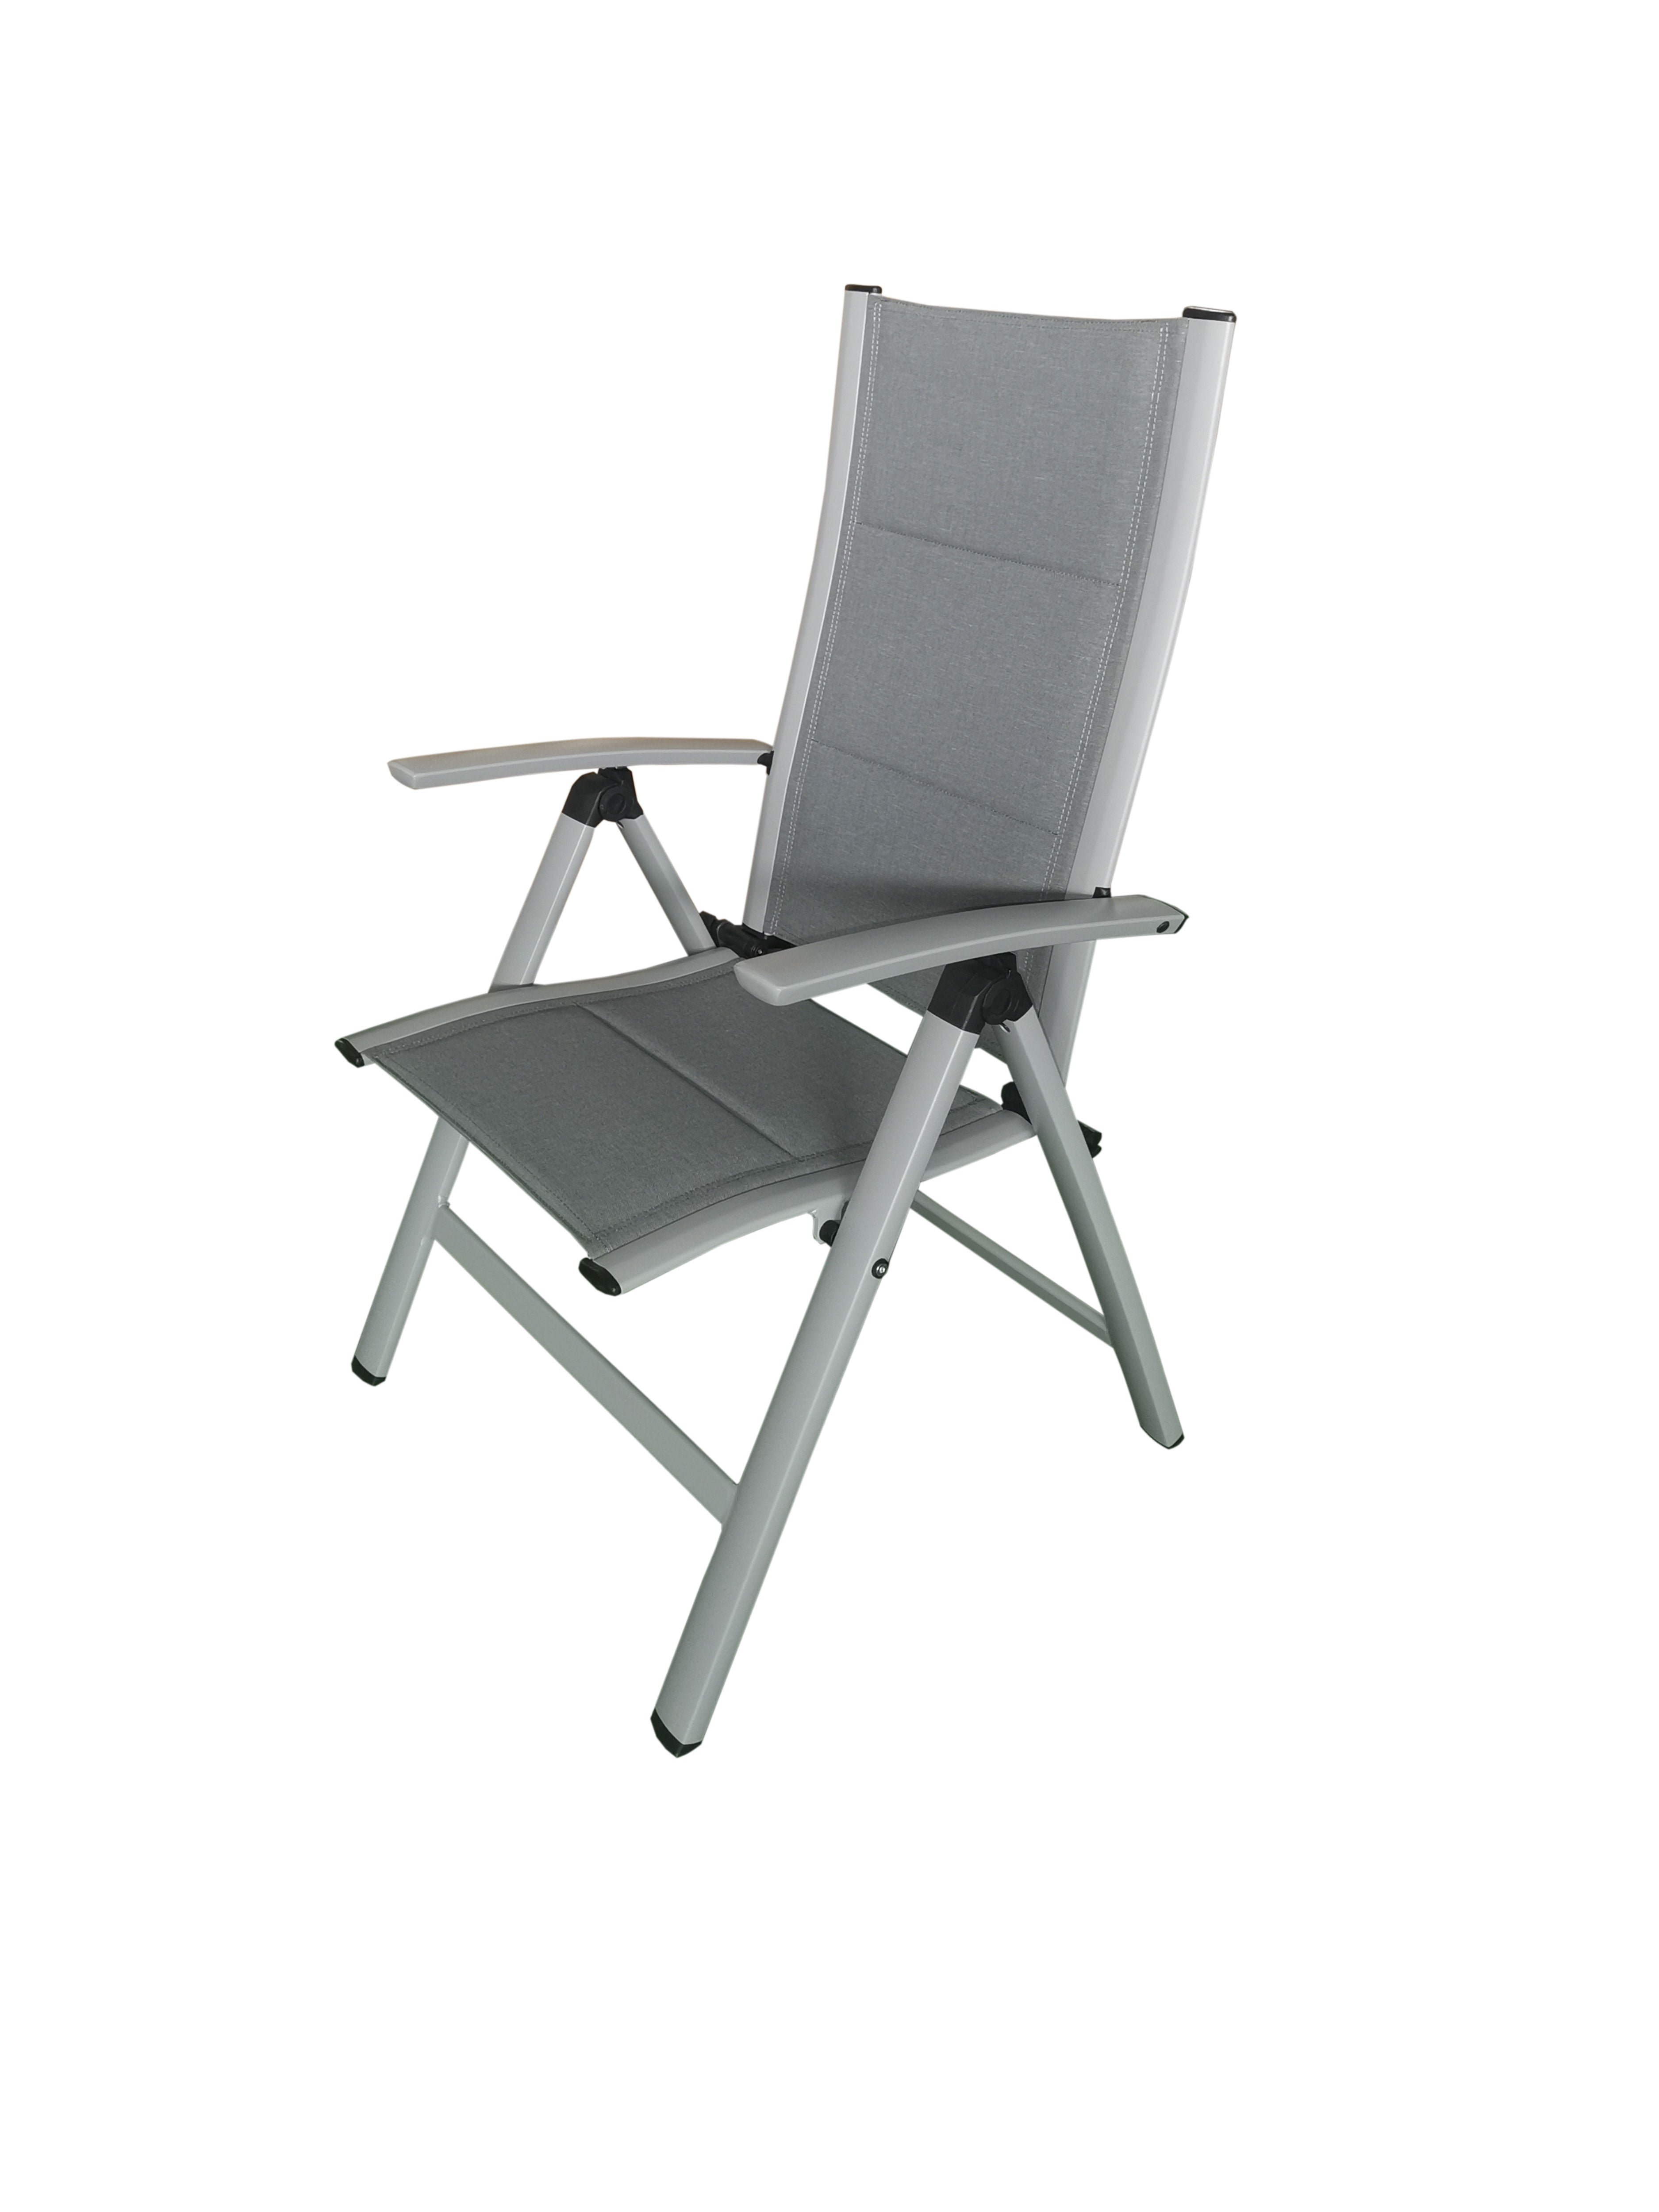 PatioZone Reclining Armchair with Quick-Dry Textilene and Aluminum Frame (MOSS-0438GPM) - Light Grey / Grey